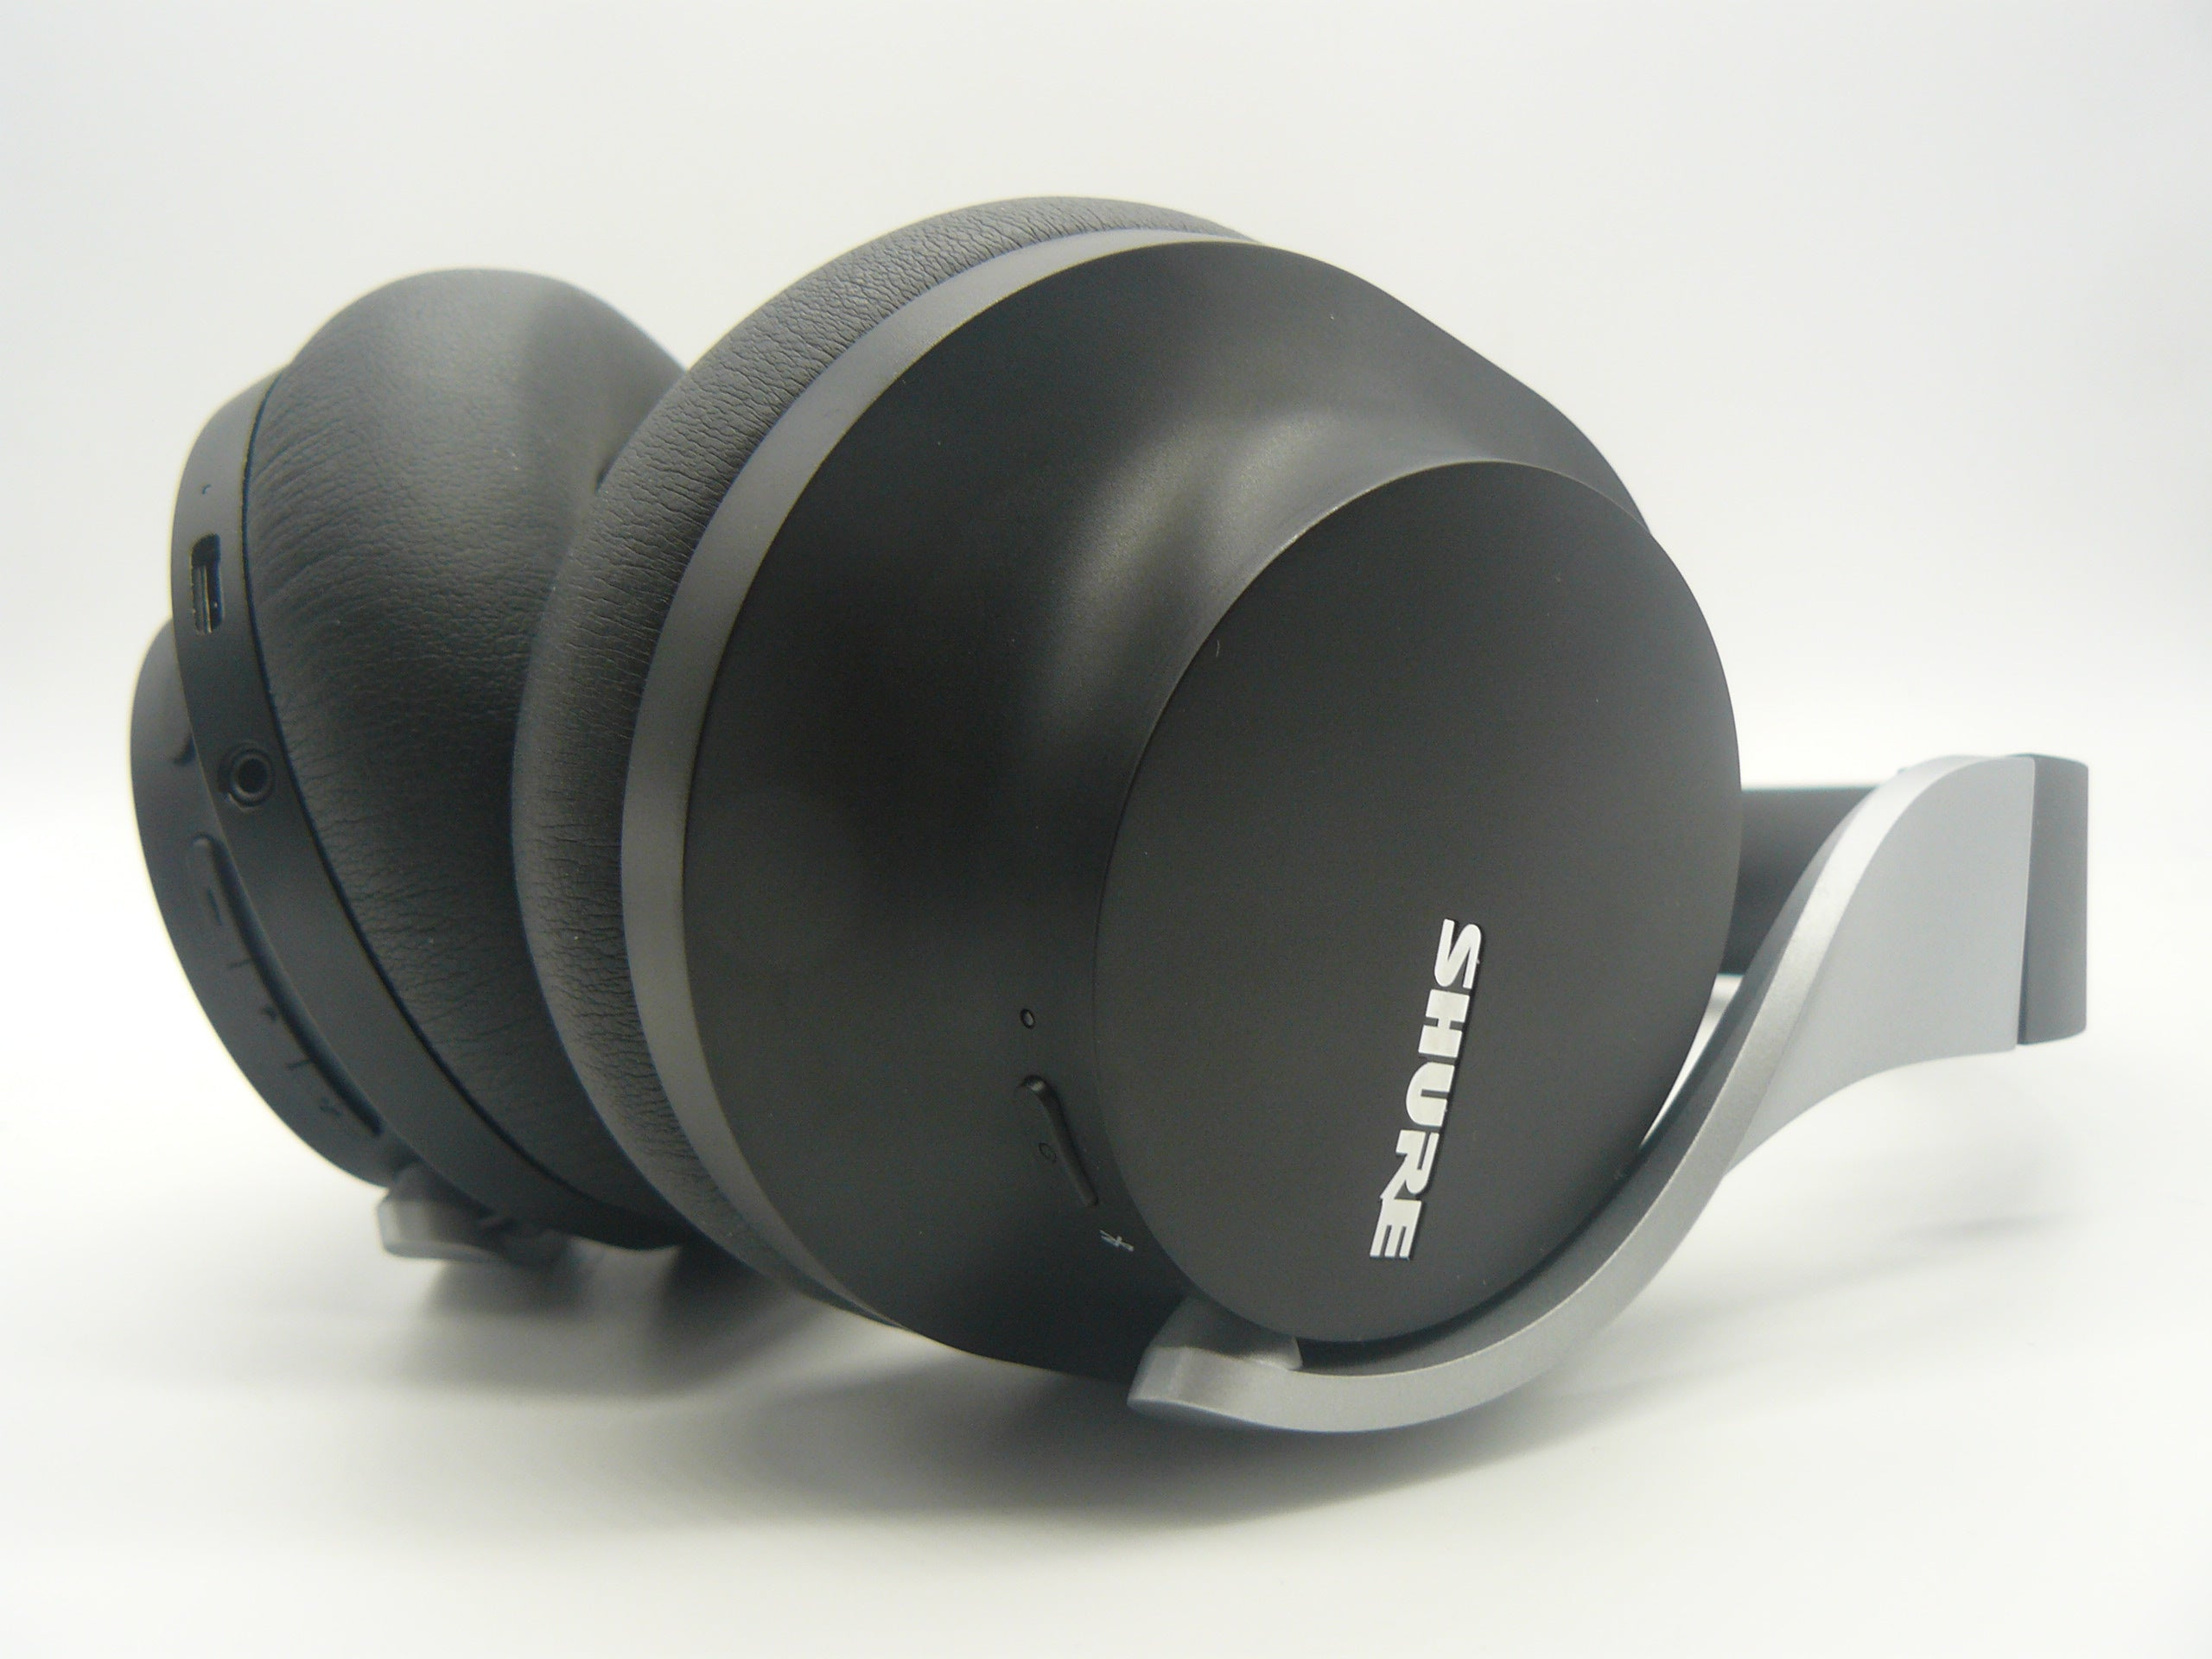 AONIC 40 - Wireless Noise Cancelling Headphones - Shure USA